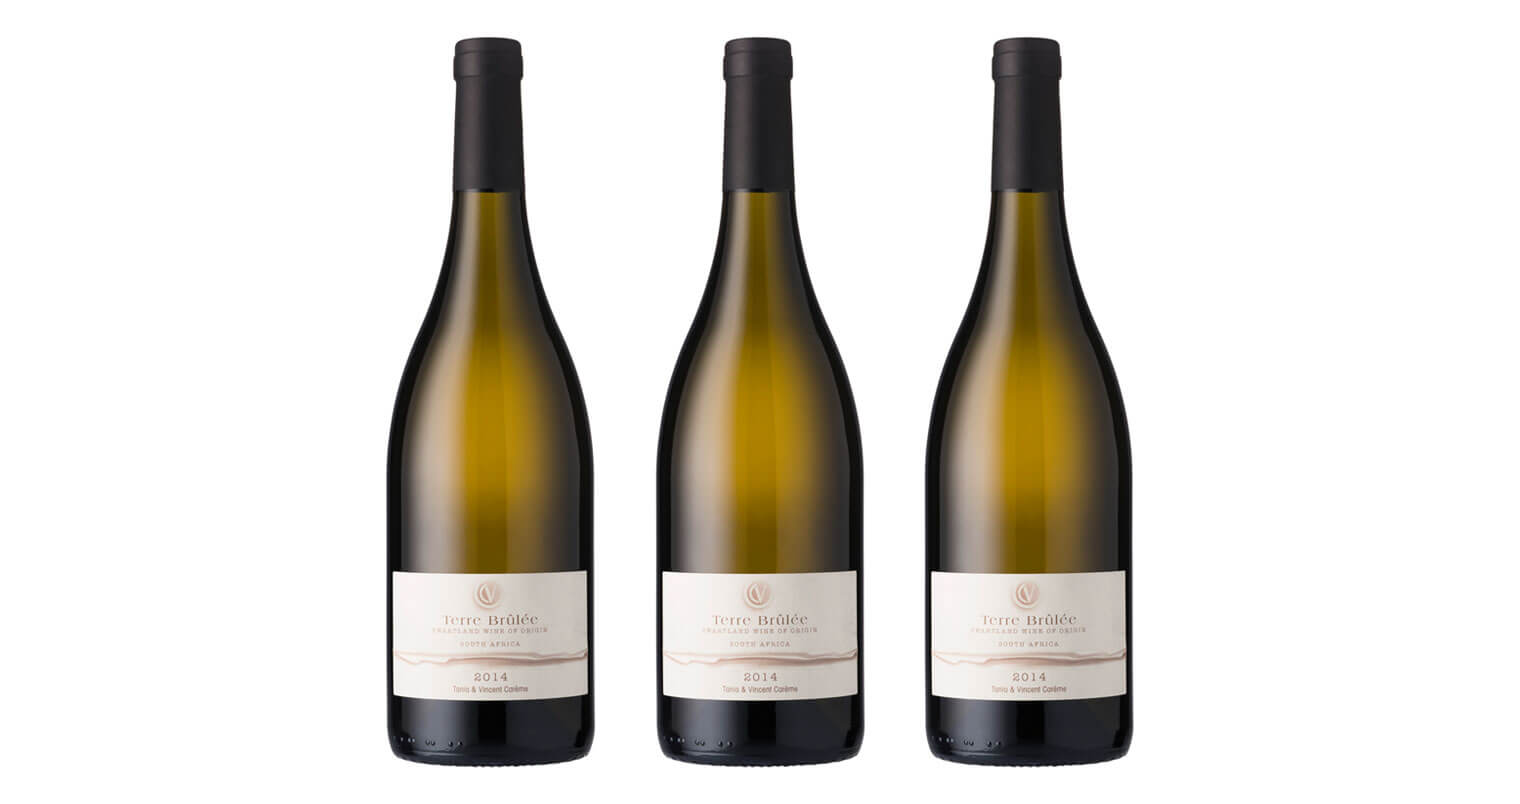 Terre Brûlée Joins Cape Classics’ Portfolio, Linking France and South Africa